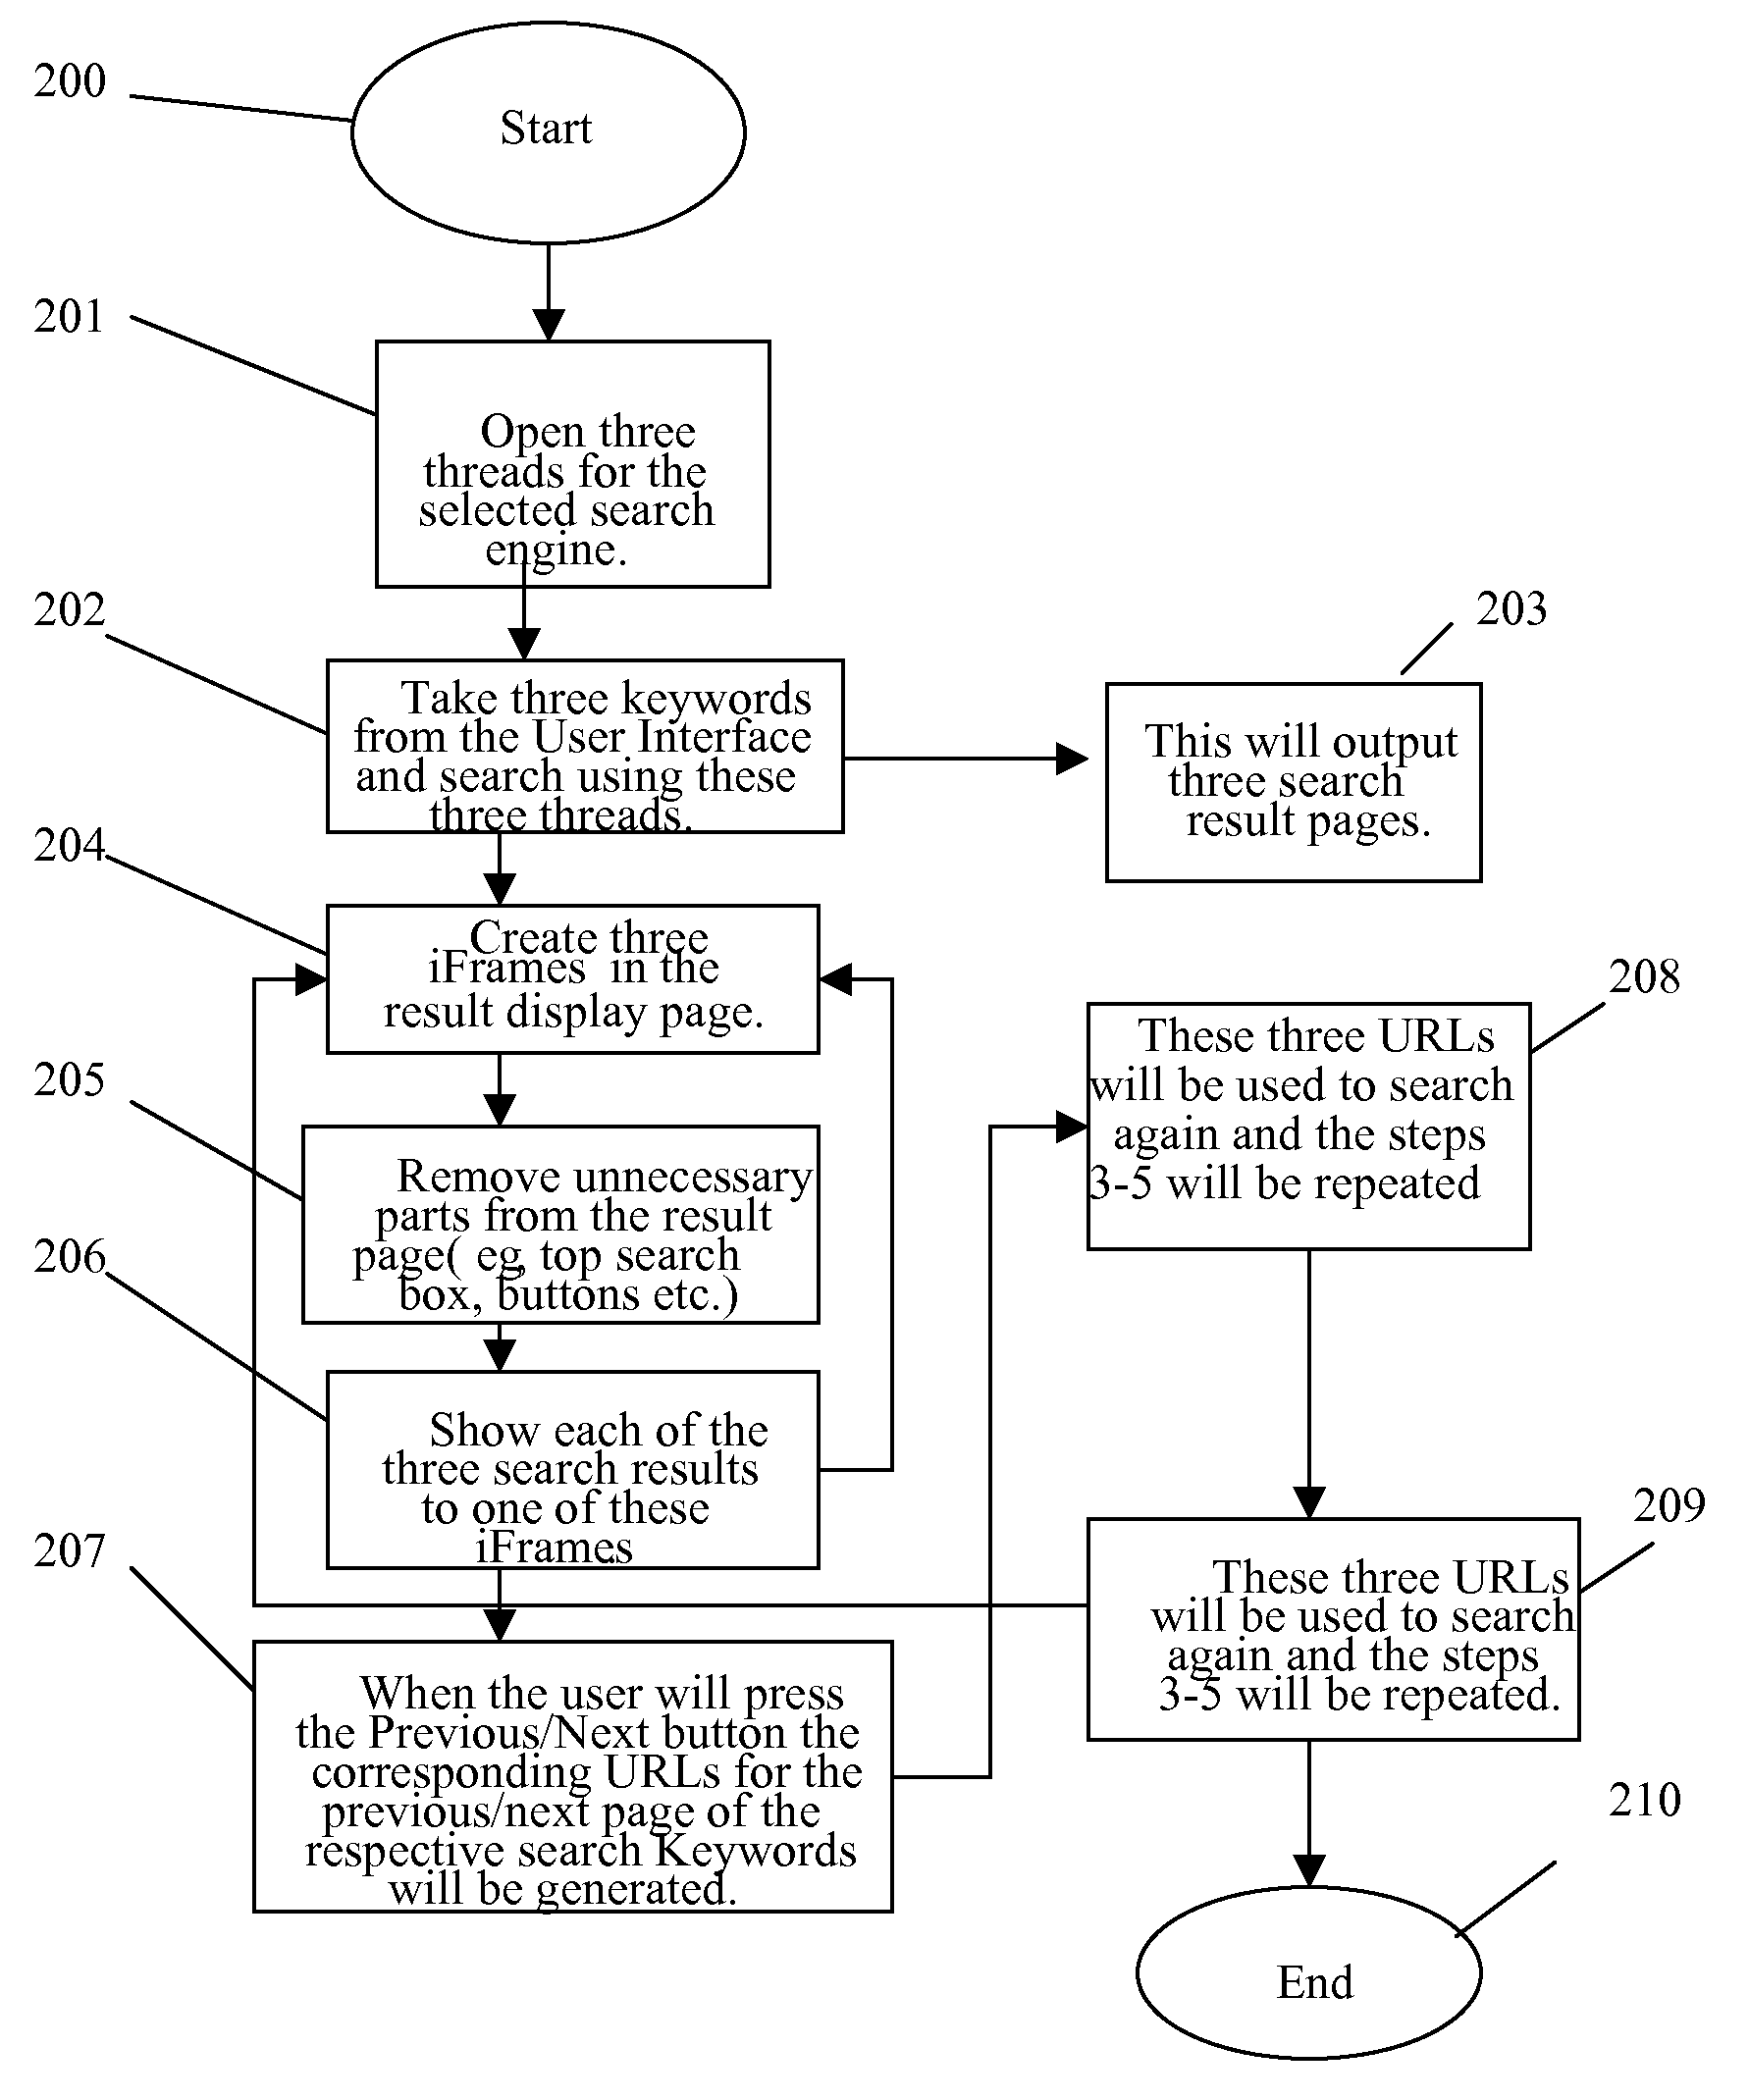 System and method of multi-page display and interaction of any internet search engine data on an internet browser